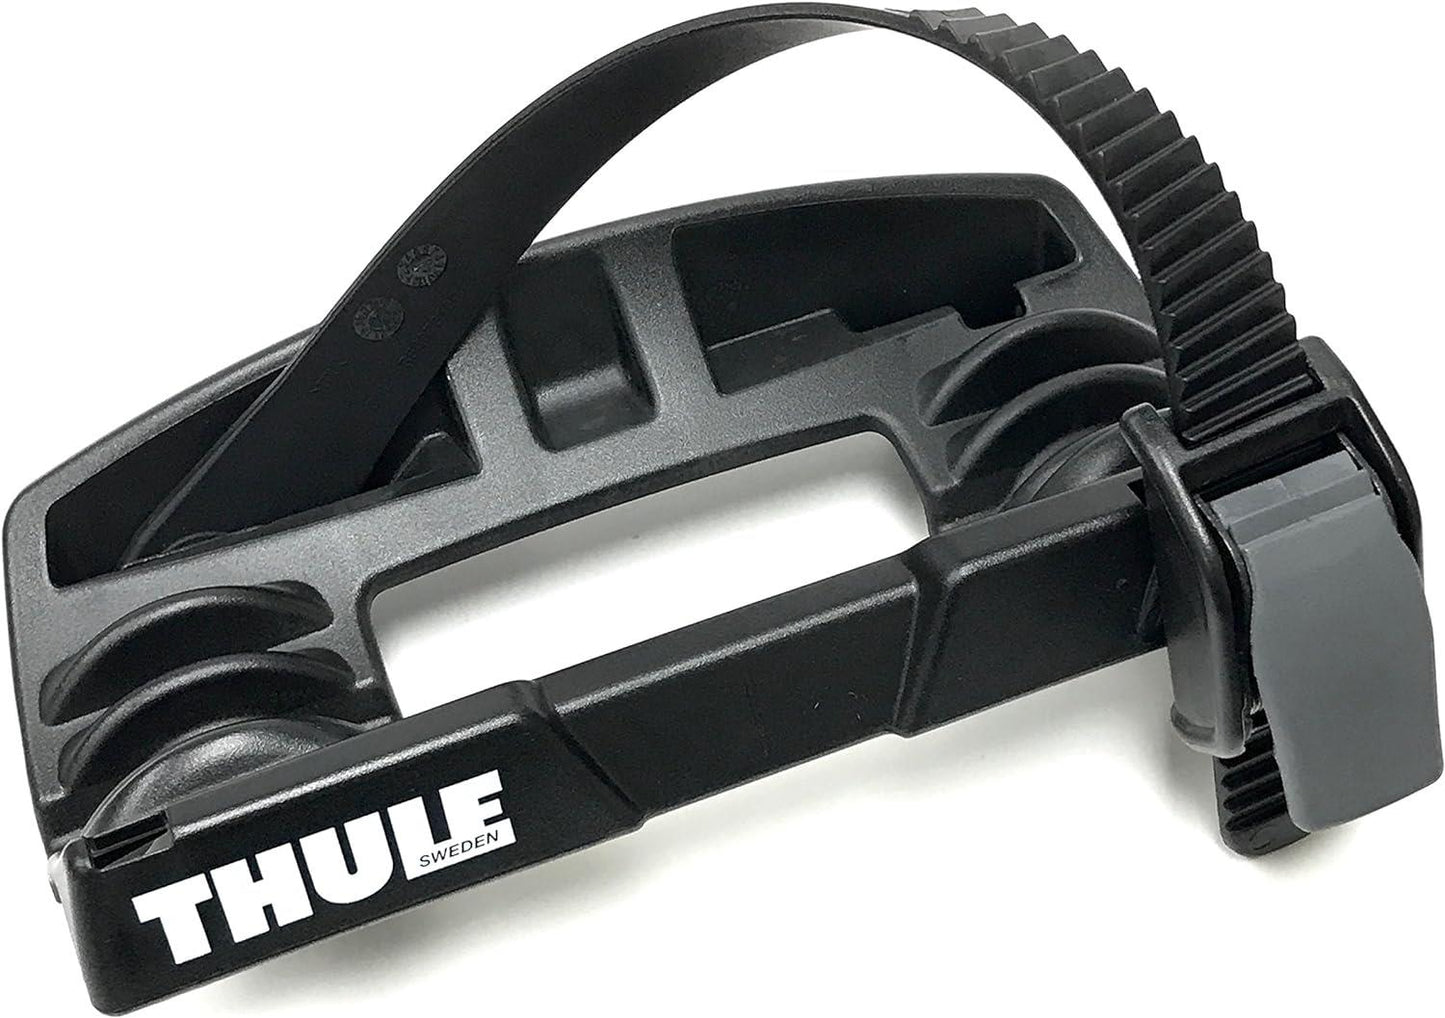 Thule 598 Pro Ride Bike Cycle Carrier Wheel Holder Tray FRONT | Spare Part 52676